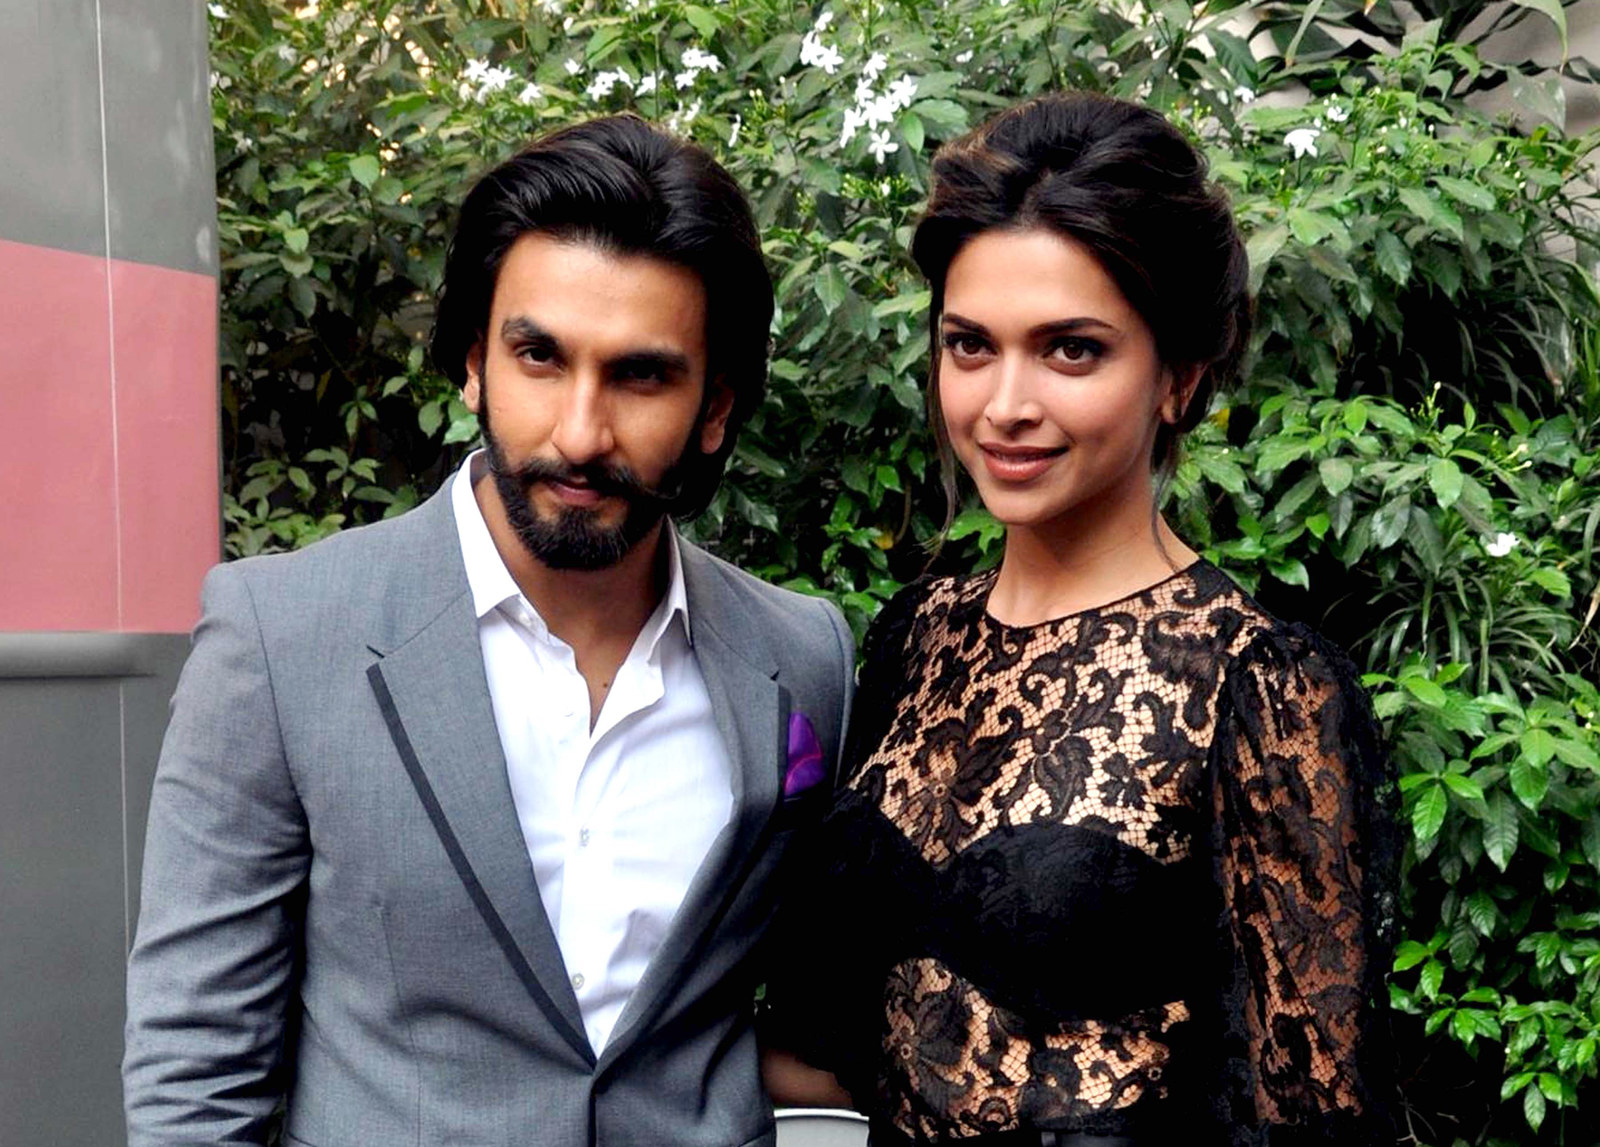 Just 11 Photos Of Deepika And Ranveer Thatll Take Your Breath Away